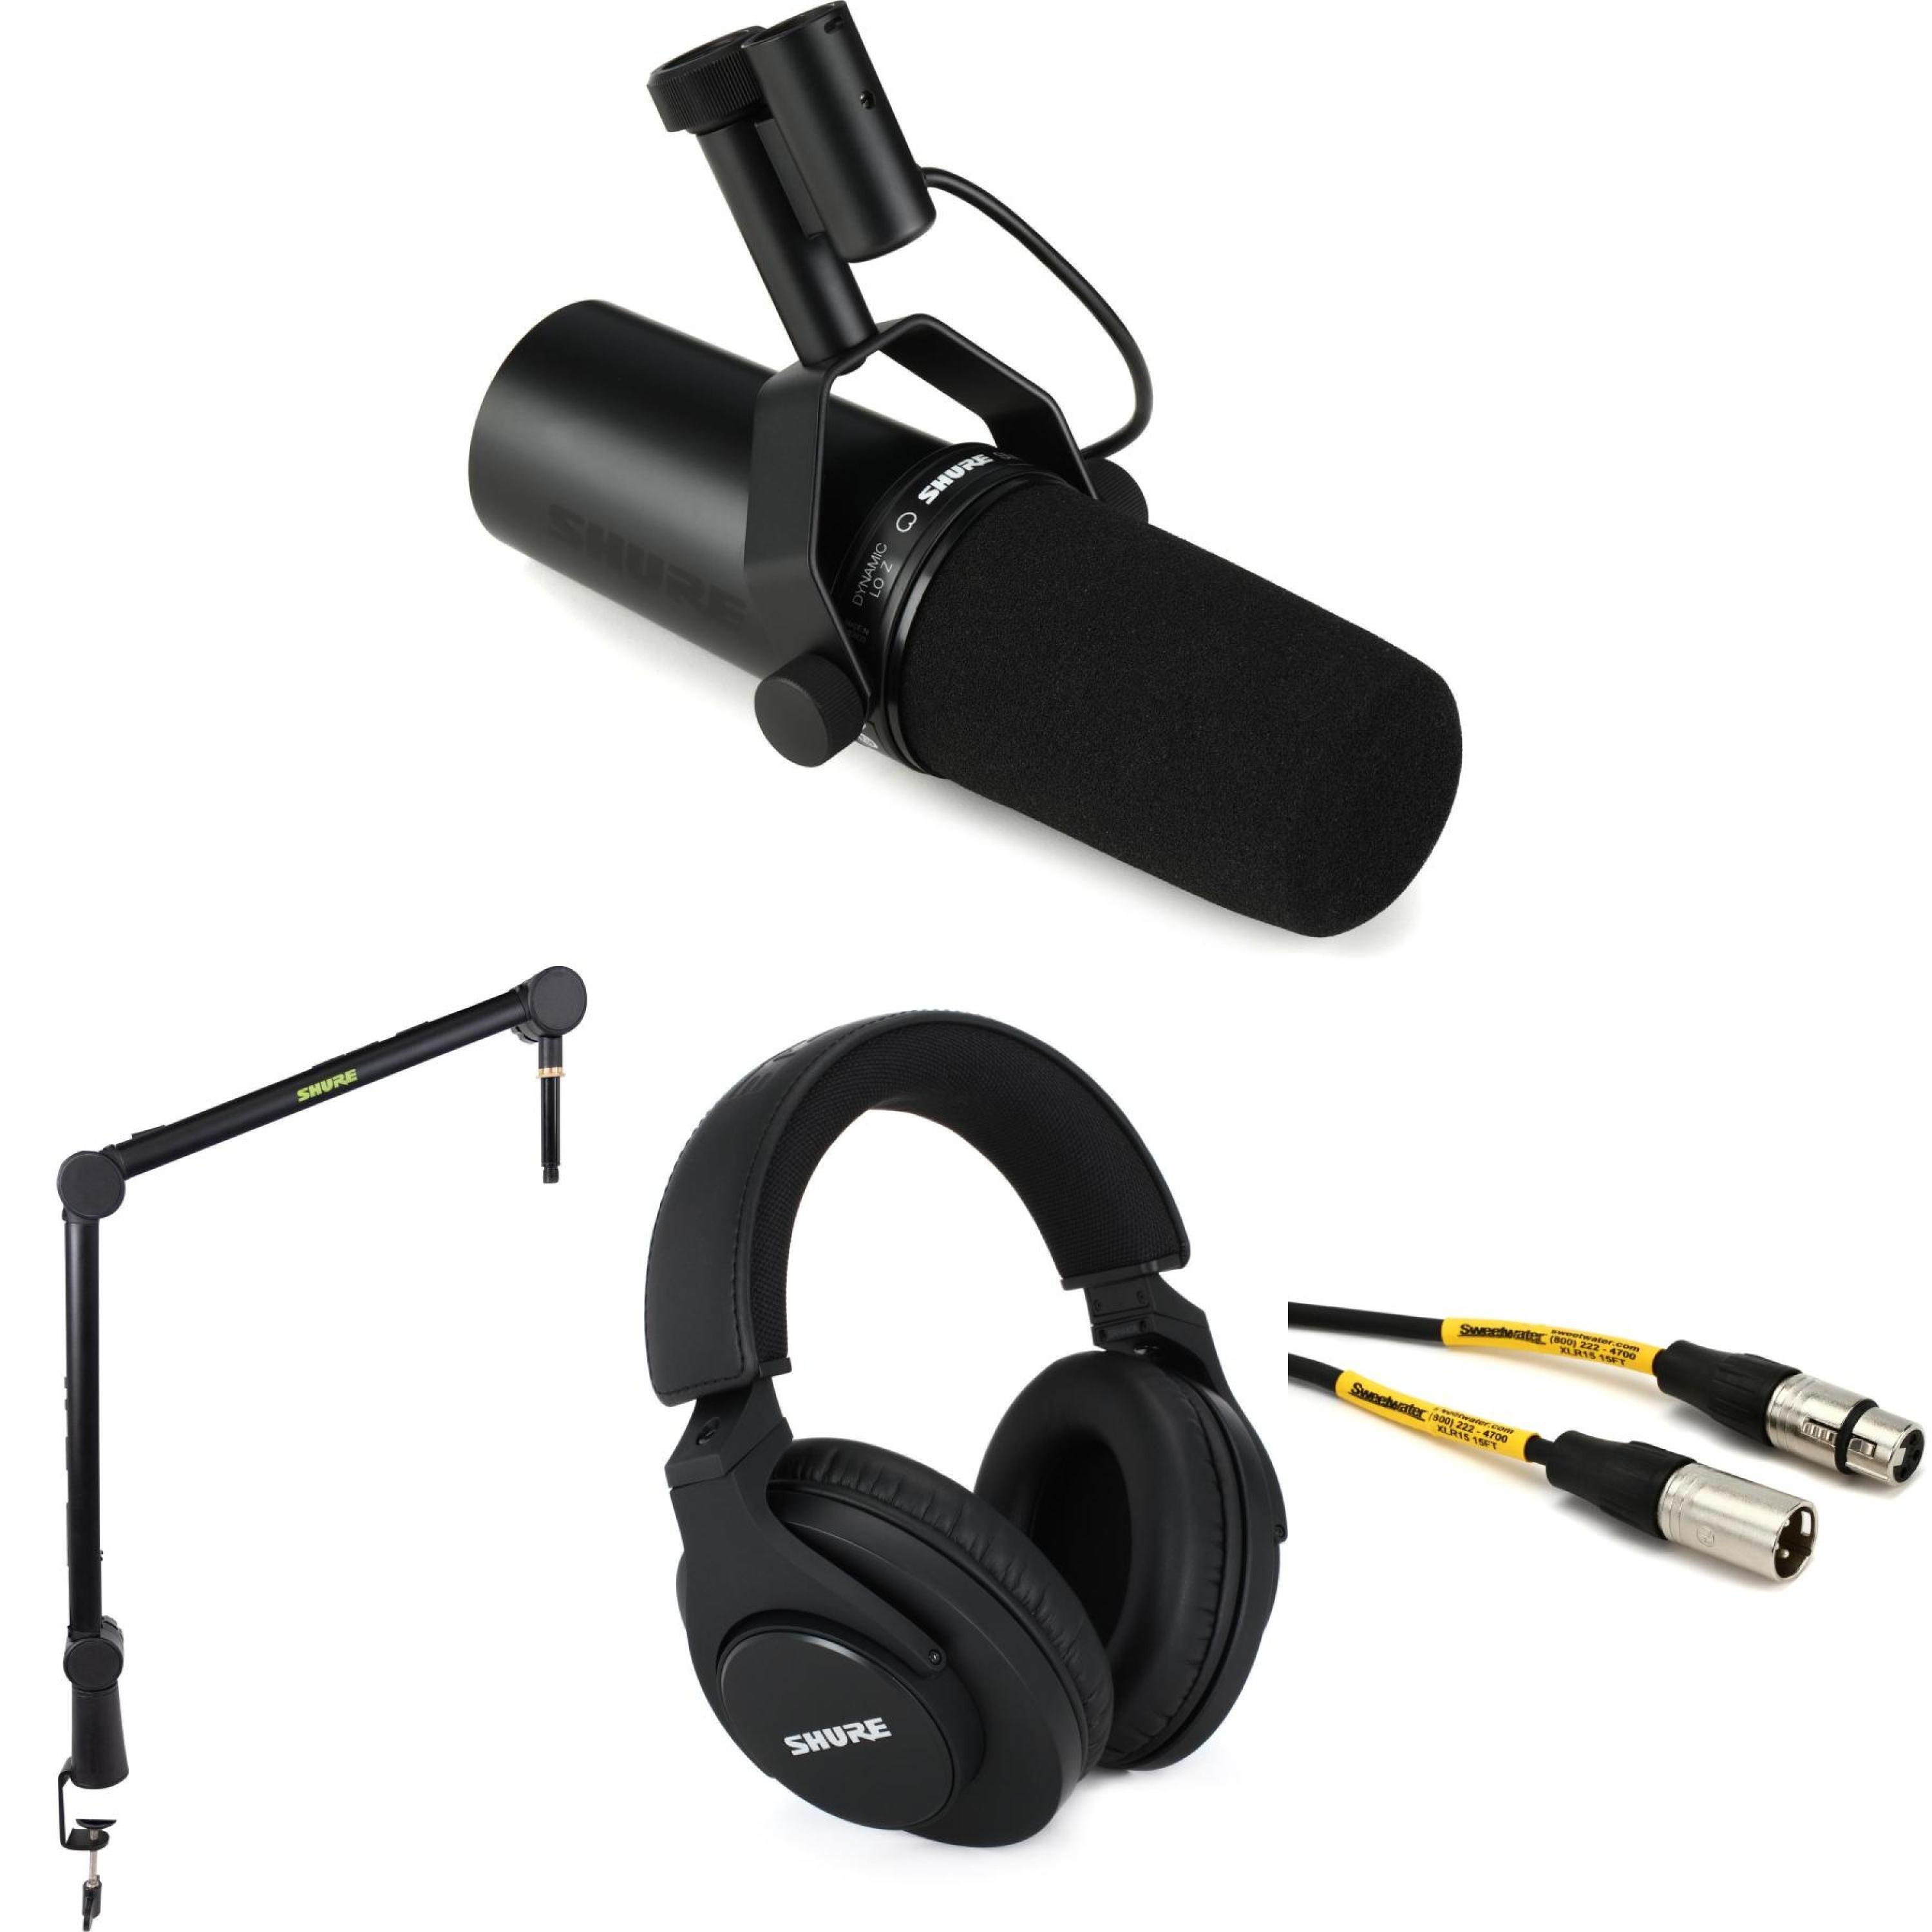 Shure MV7-S Podcast Microphone and SRH440A Pro Headphones Bundle